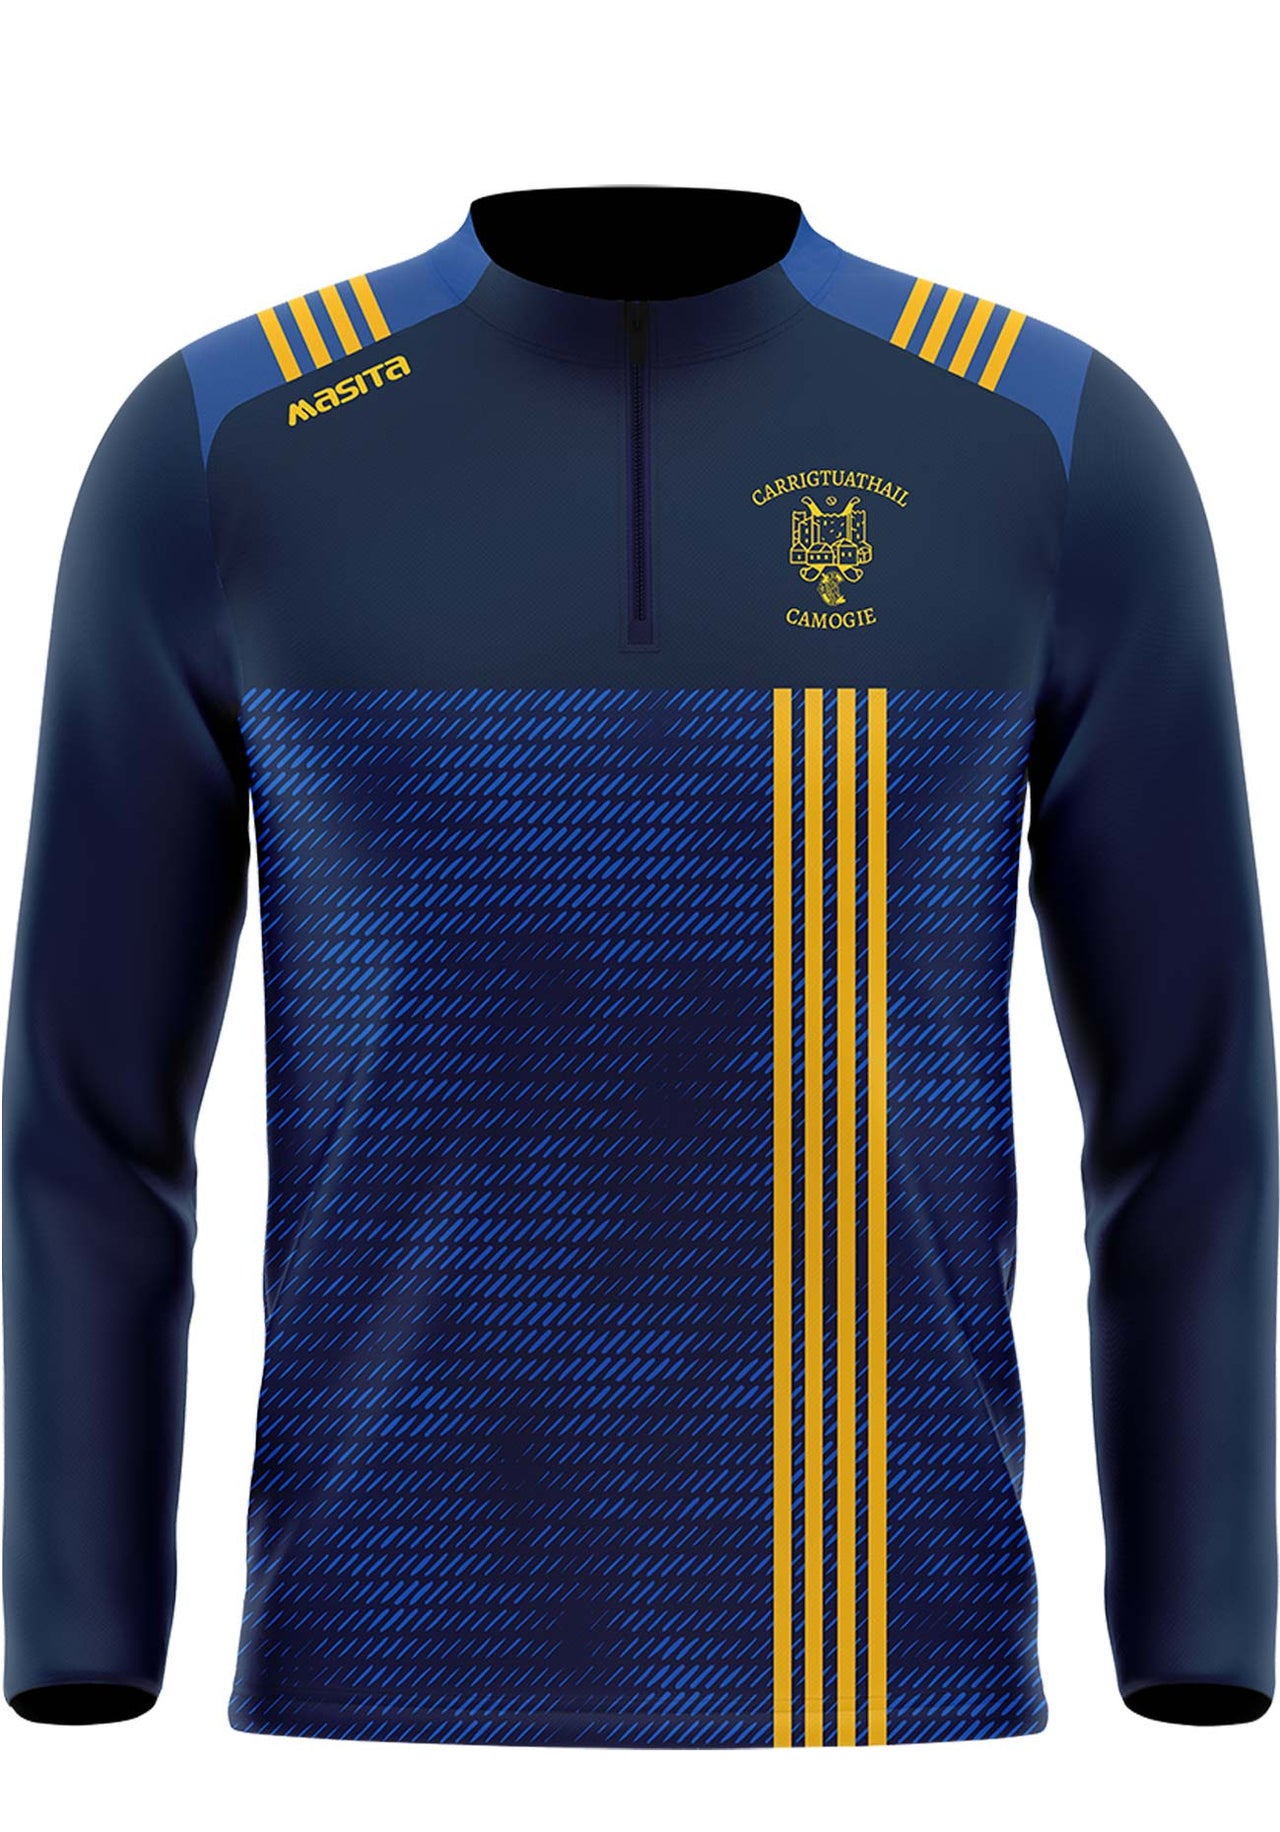 Carrigtwohill Camogie Quarter Zip Adults